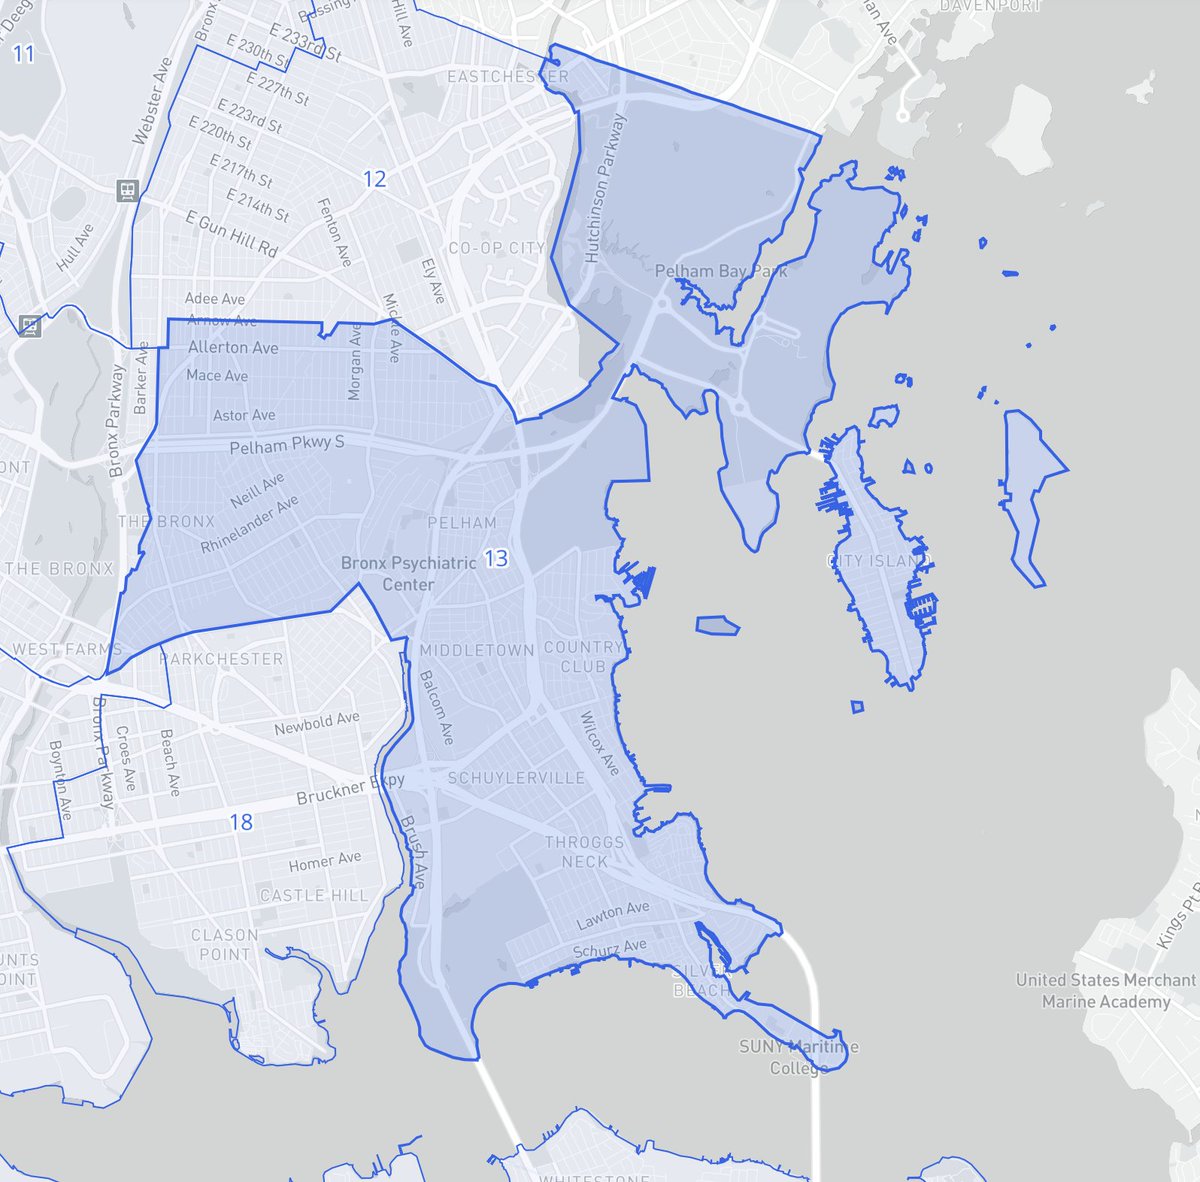 This is New York City Council District 13 in the East Bronx. It is entirely located within #NY14, represented by @AOC and she lives just a few blocks outside of it.
In 2020, AOC won it by 22 points 61-39. In 2022, she LOST it by 4. 51-47
Then in 2023, Republicans won the seat.